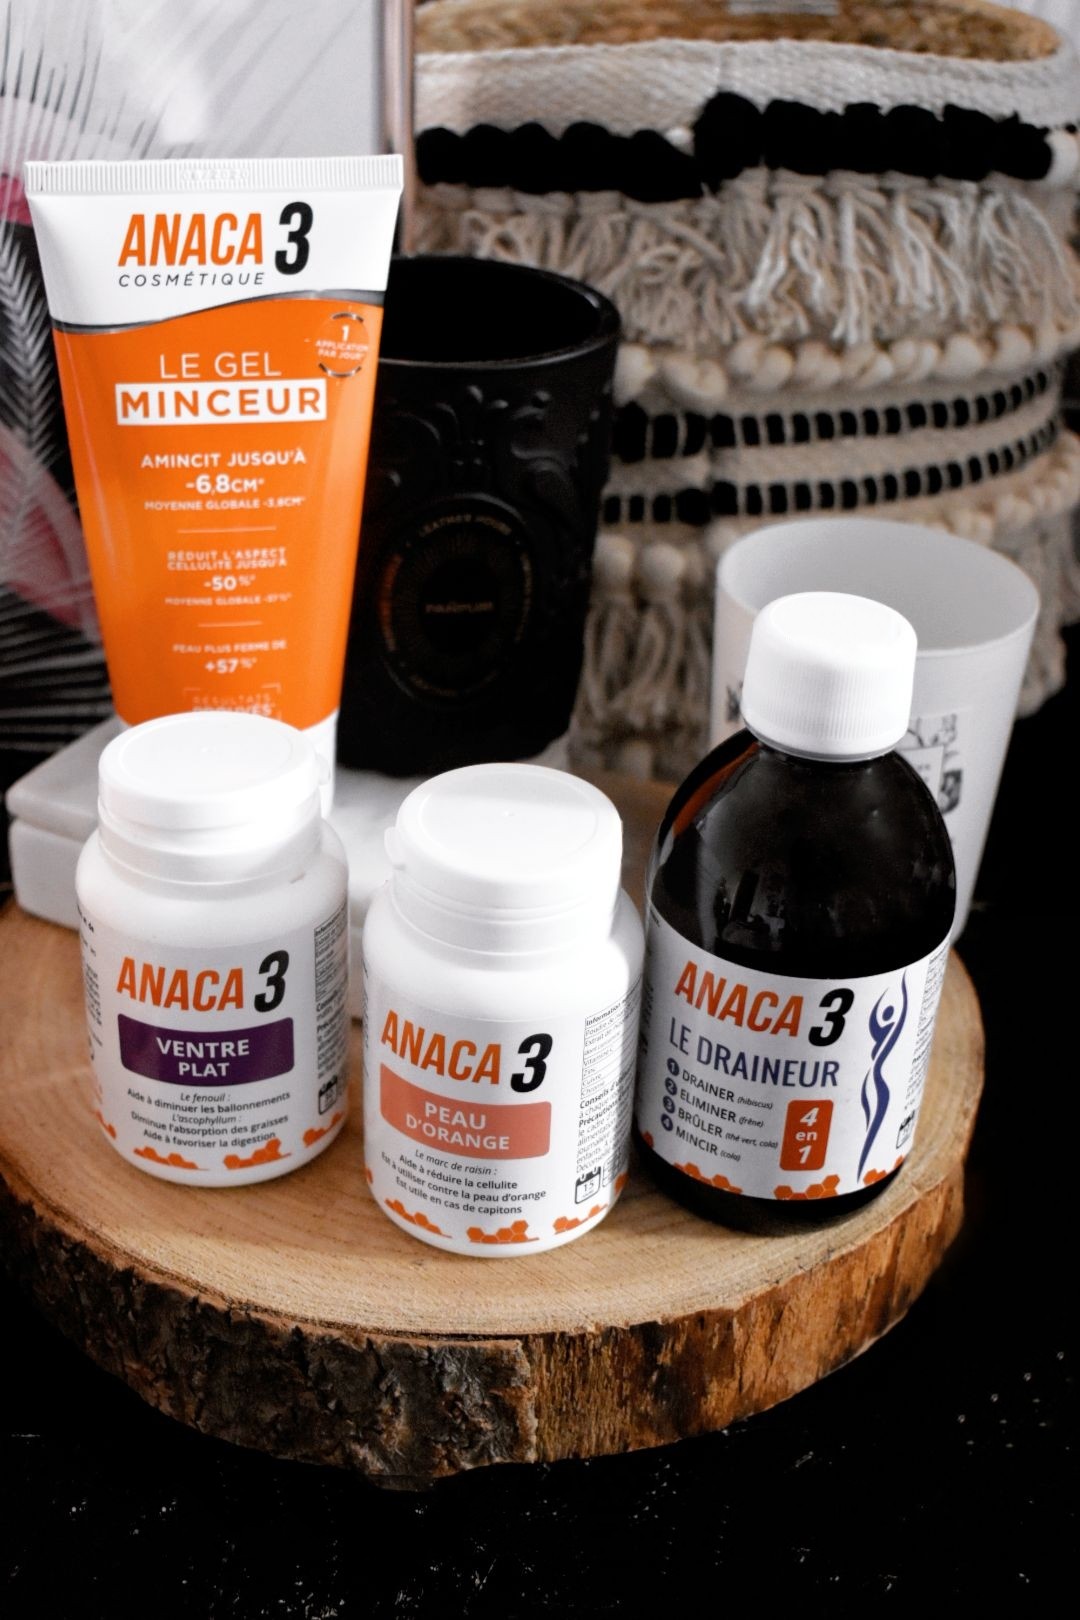 Slimming and well-being routine with Anaca3 